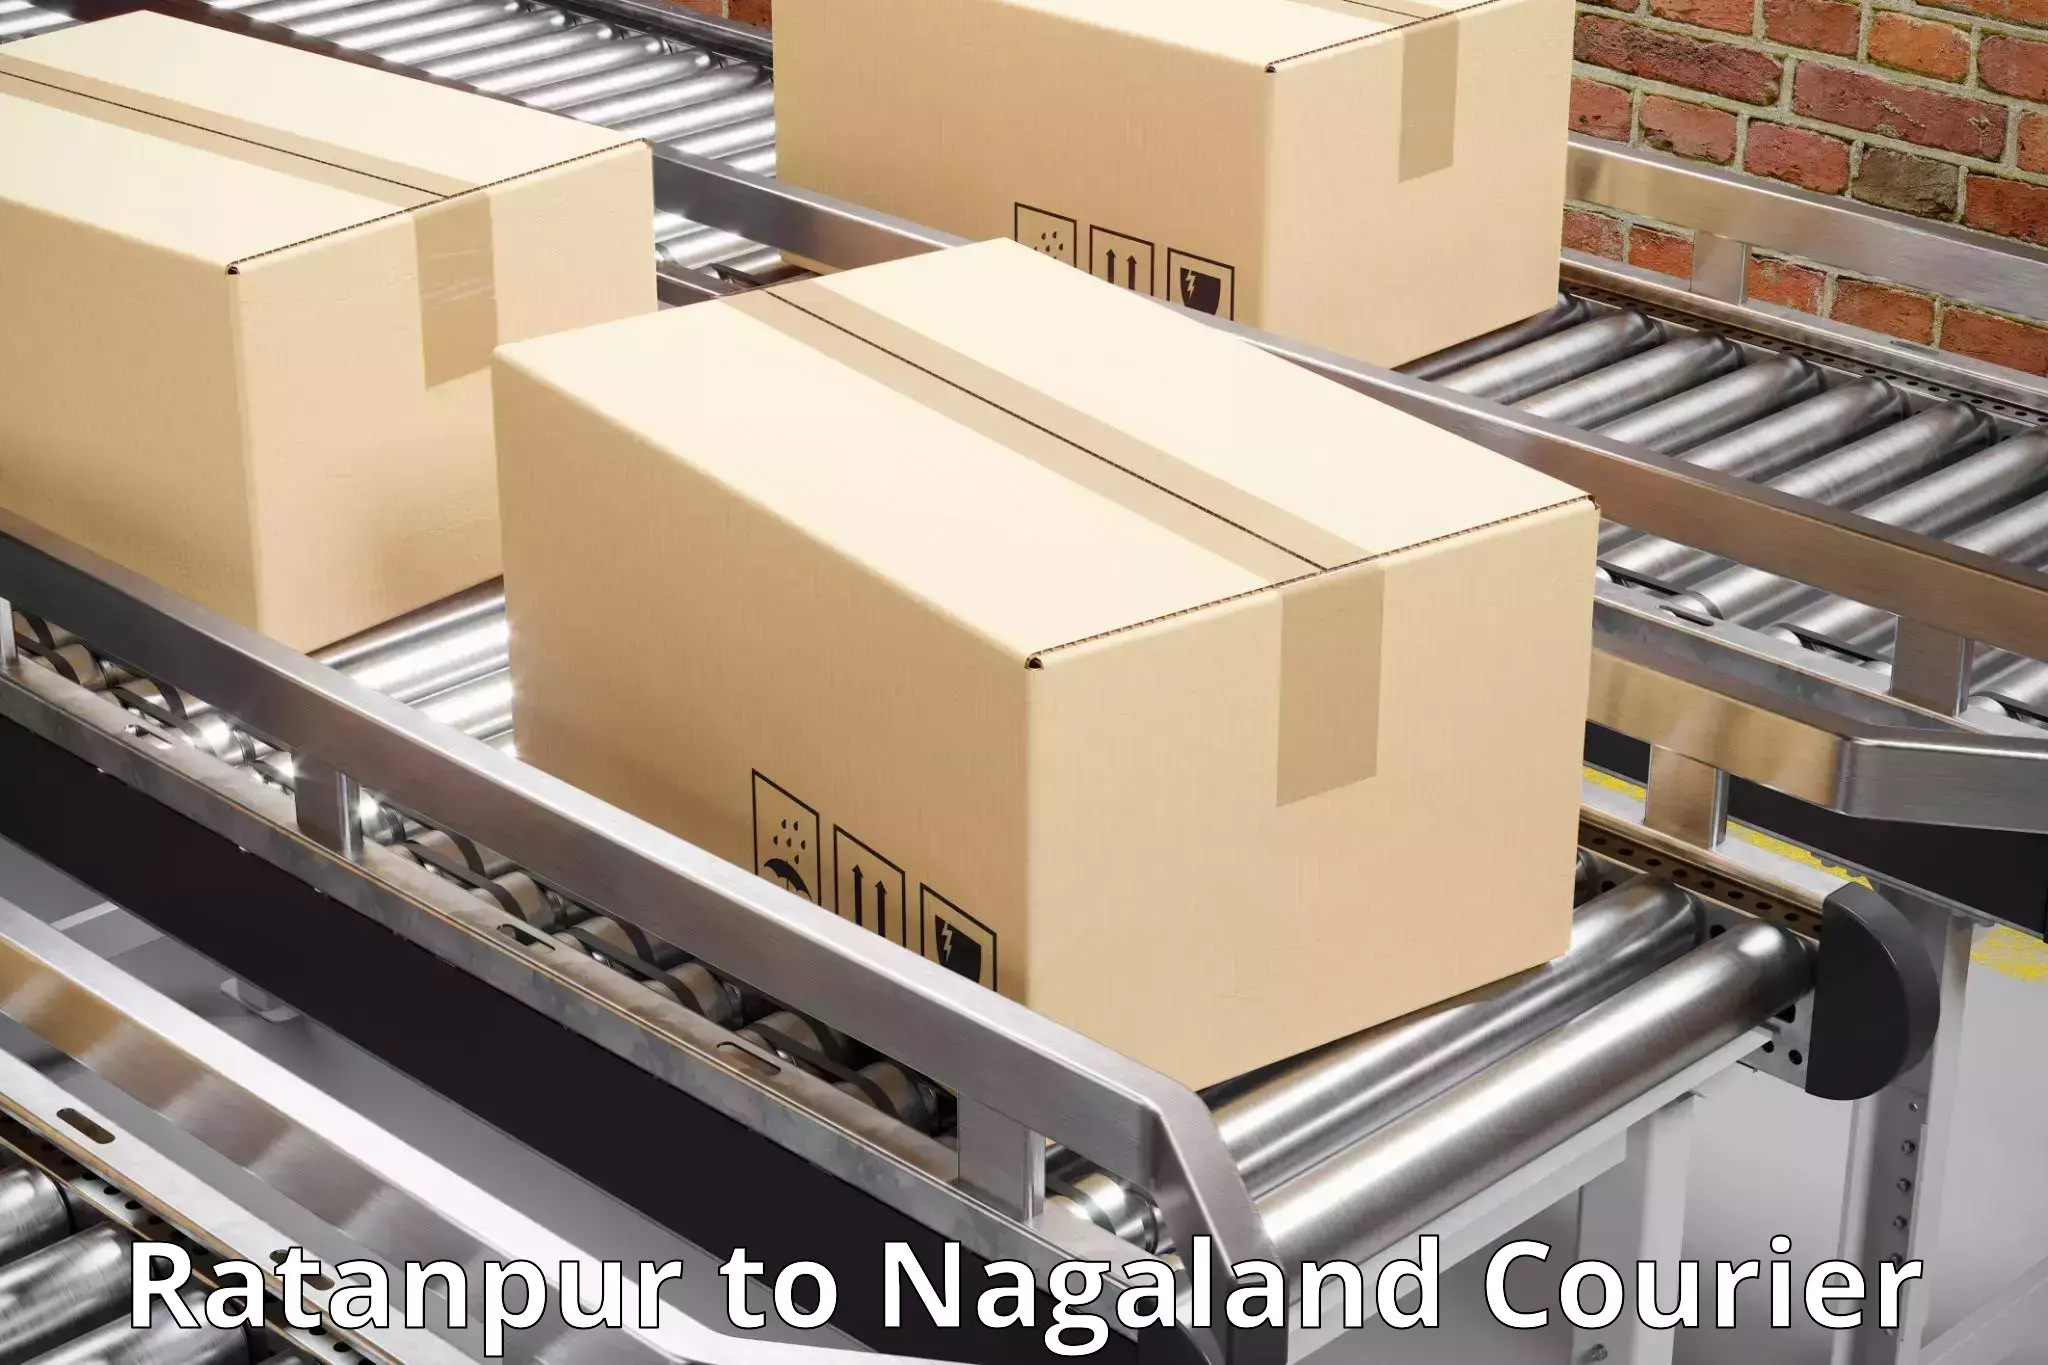 Next-day delivery options Ratanpur to Nagaland